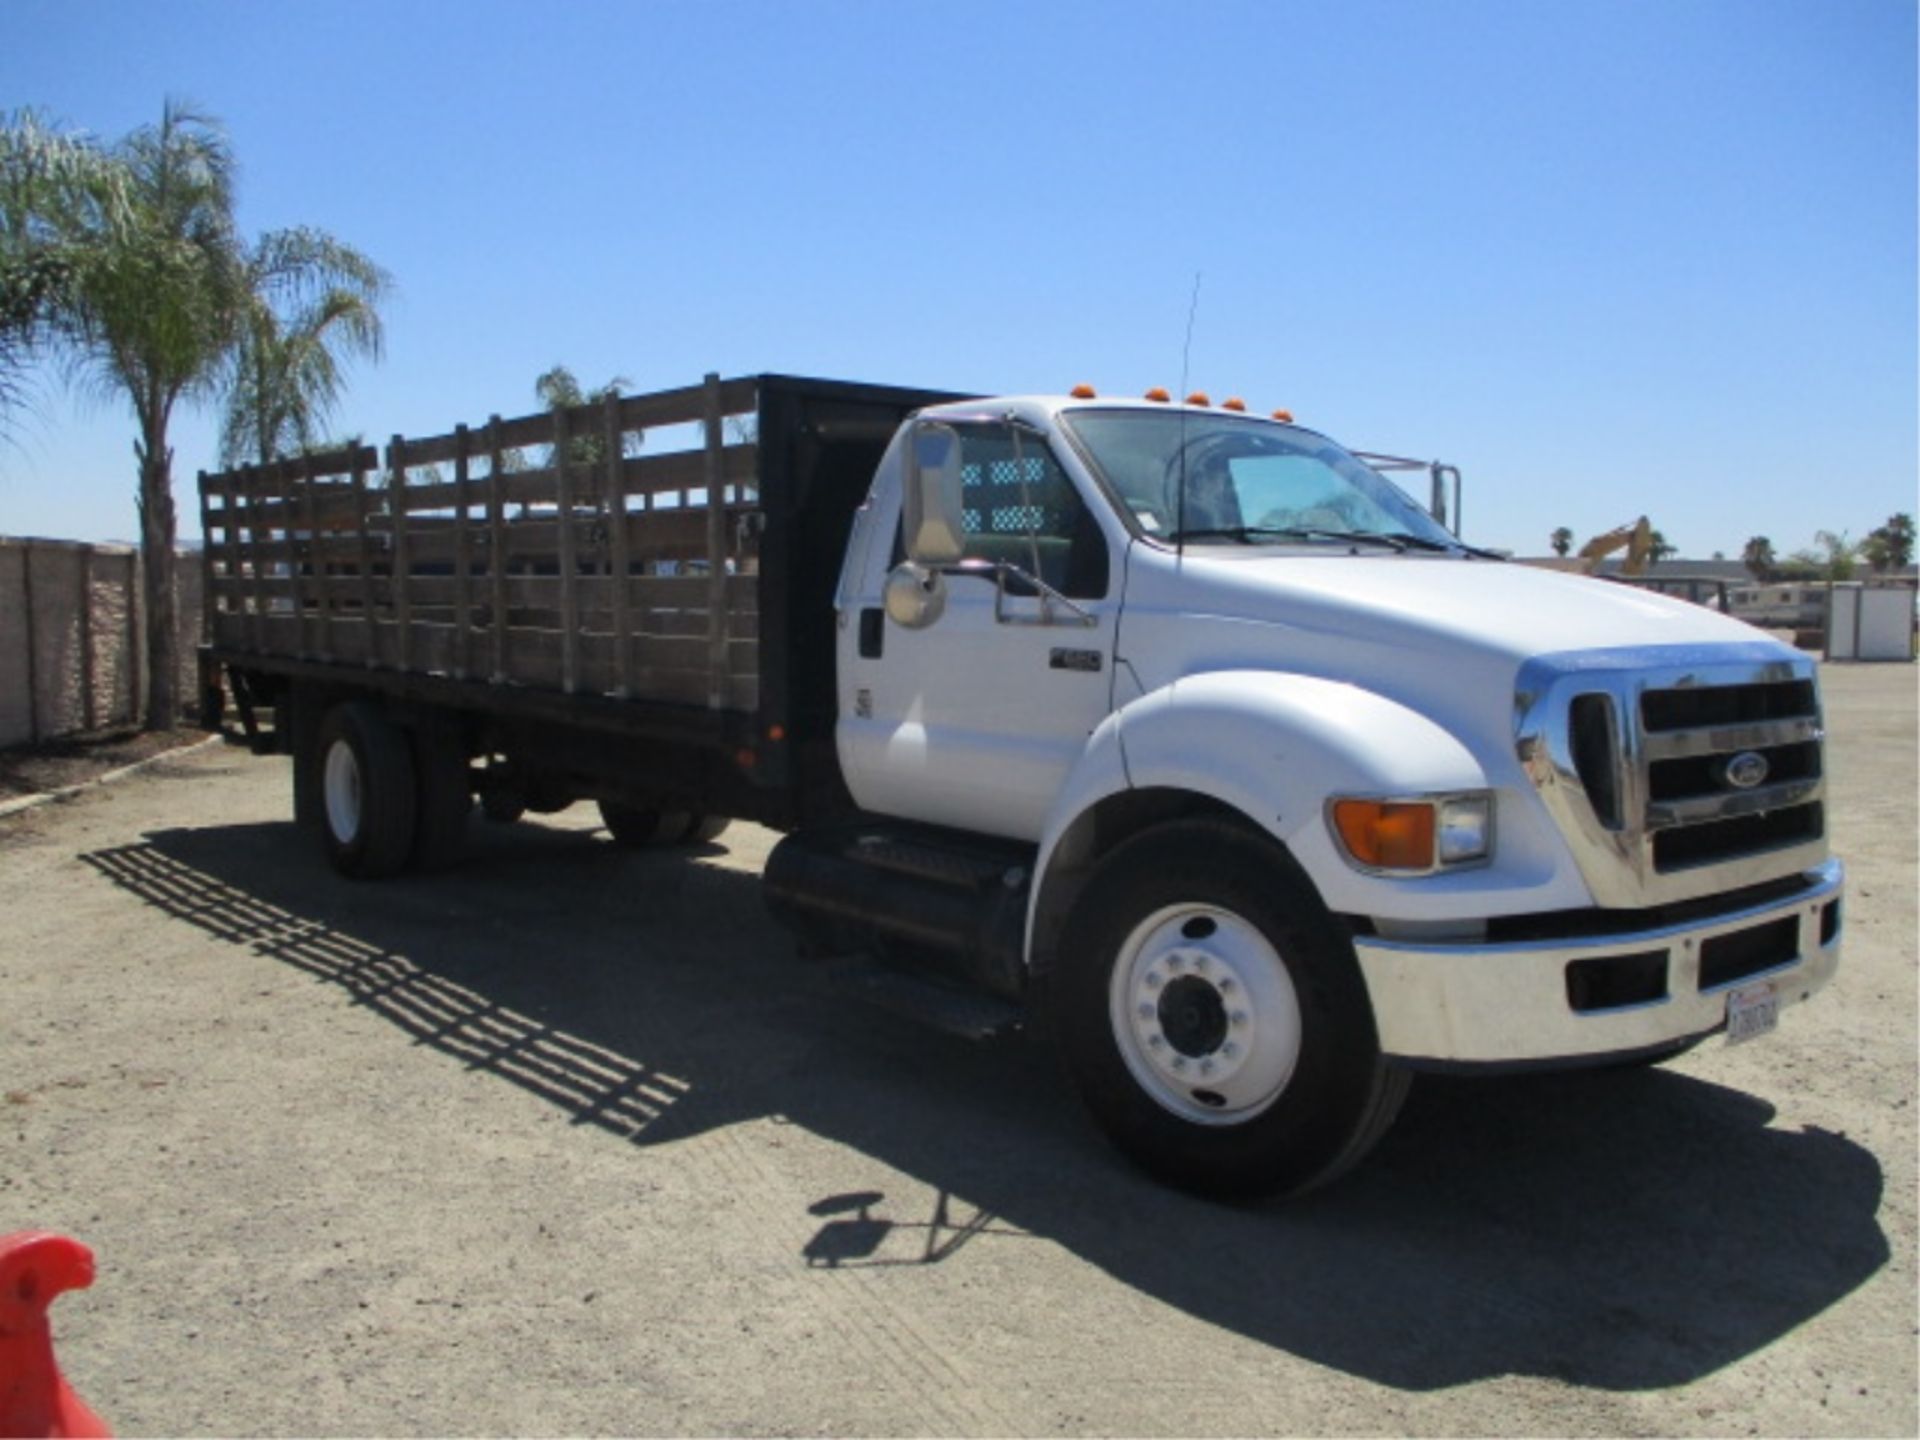 2005 Ford F650 S/A Flatbed Stakebed Truck, Cat C7 Acert 7.2L 6-Cyl Diesel, Automatic, Lift Gate, 24' - Image 12 of 61